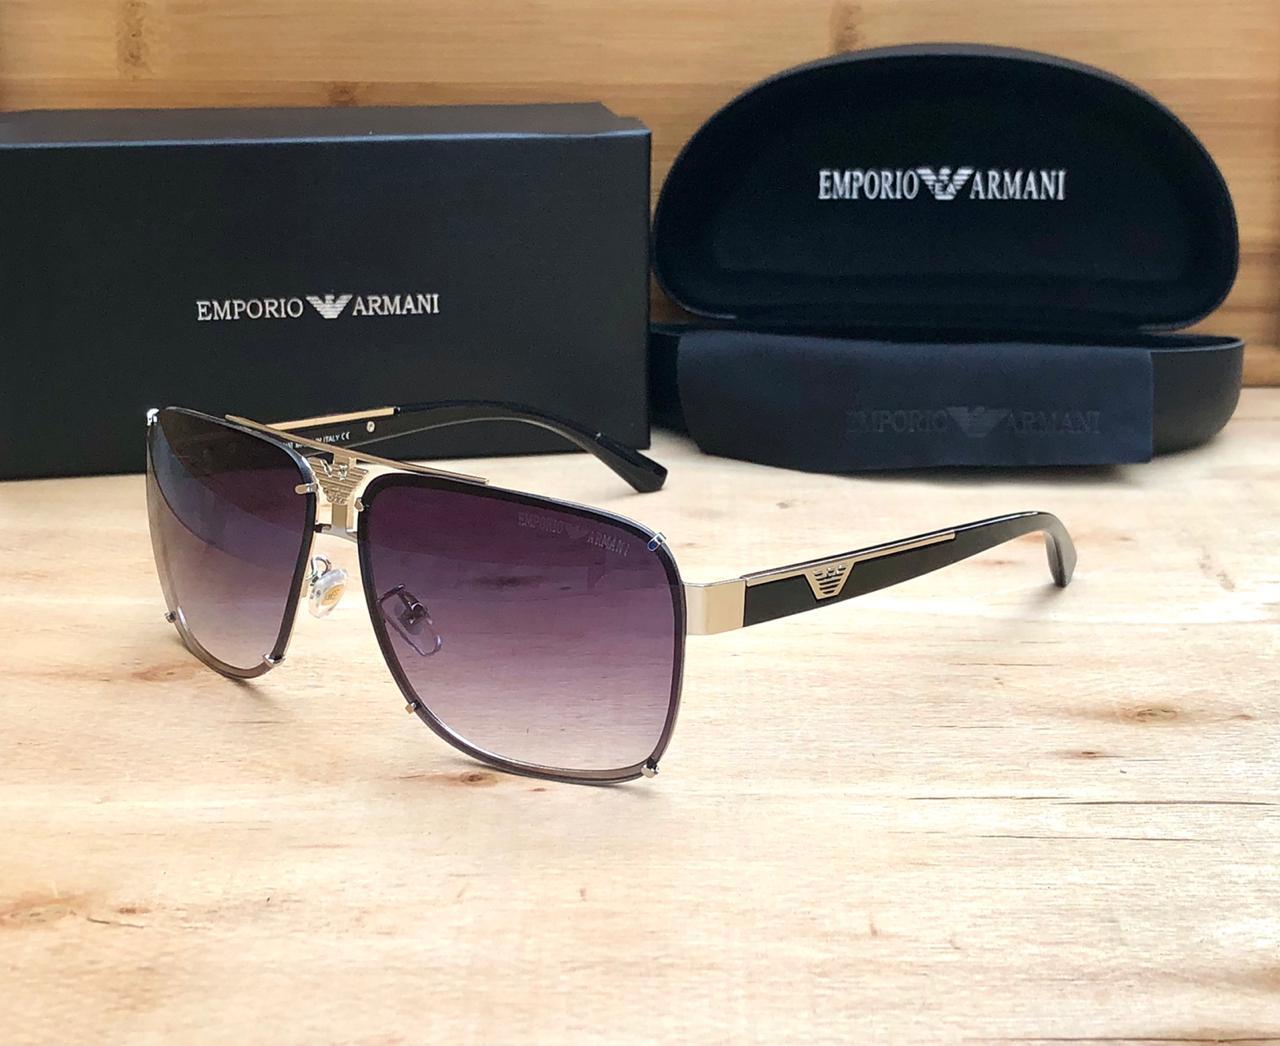 Emporio Armani Branded Purple Glass Men's and Women's Sunglass For Man and Woman Or Girls ARM-510 Multi Color Stick Unisex gift Sunglass